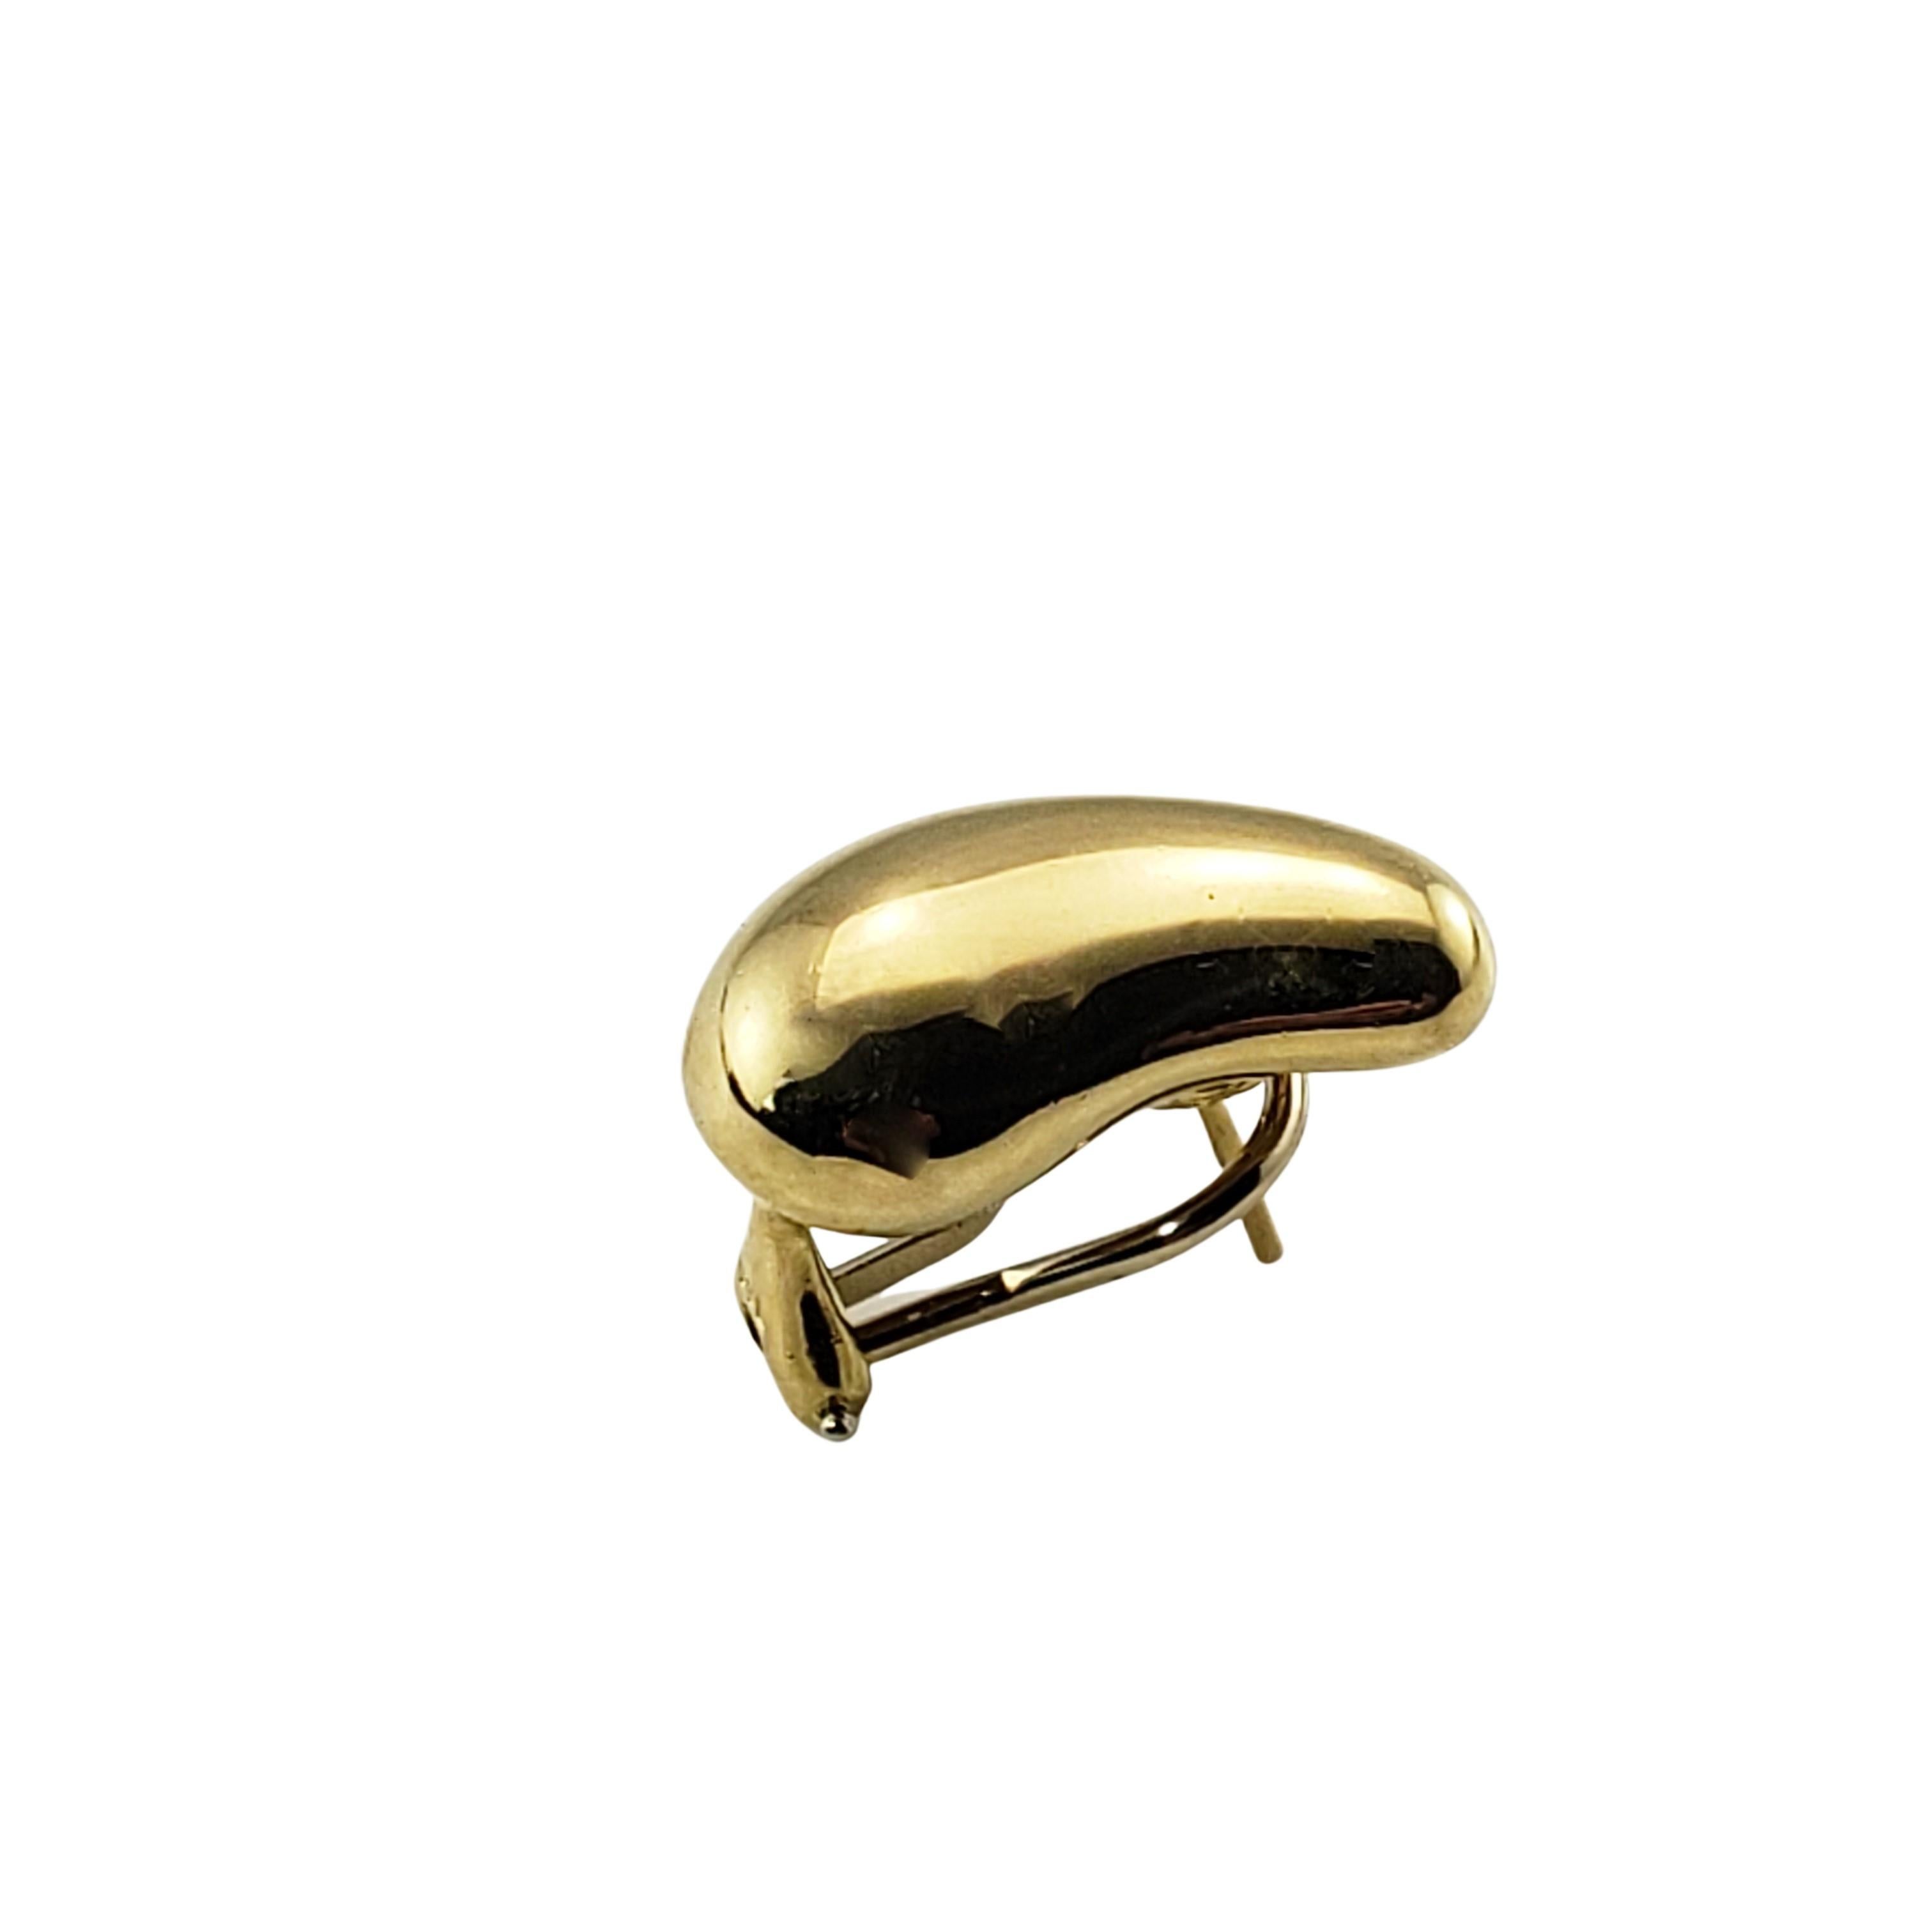 Vintage Tiffany & Co Elsa Peretti 18 Karat Yellow Gold Single Bean Earring-

This lovely earring by Elsa Peretti for Tiffany & Co. is crafted in beautifully detailed 18K yellow gold.  Hinged closure.

Size:  21 mm x 11 mm

Weight:    3.5 dwt. /  